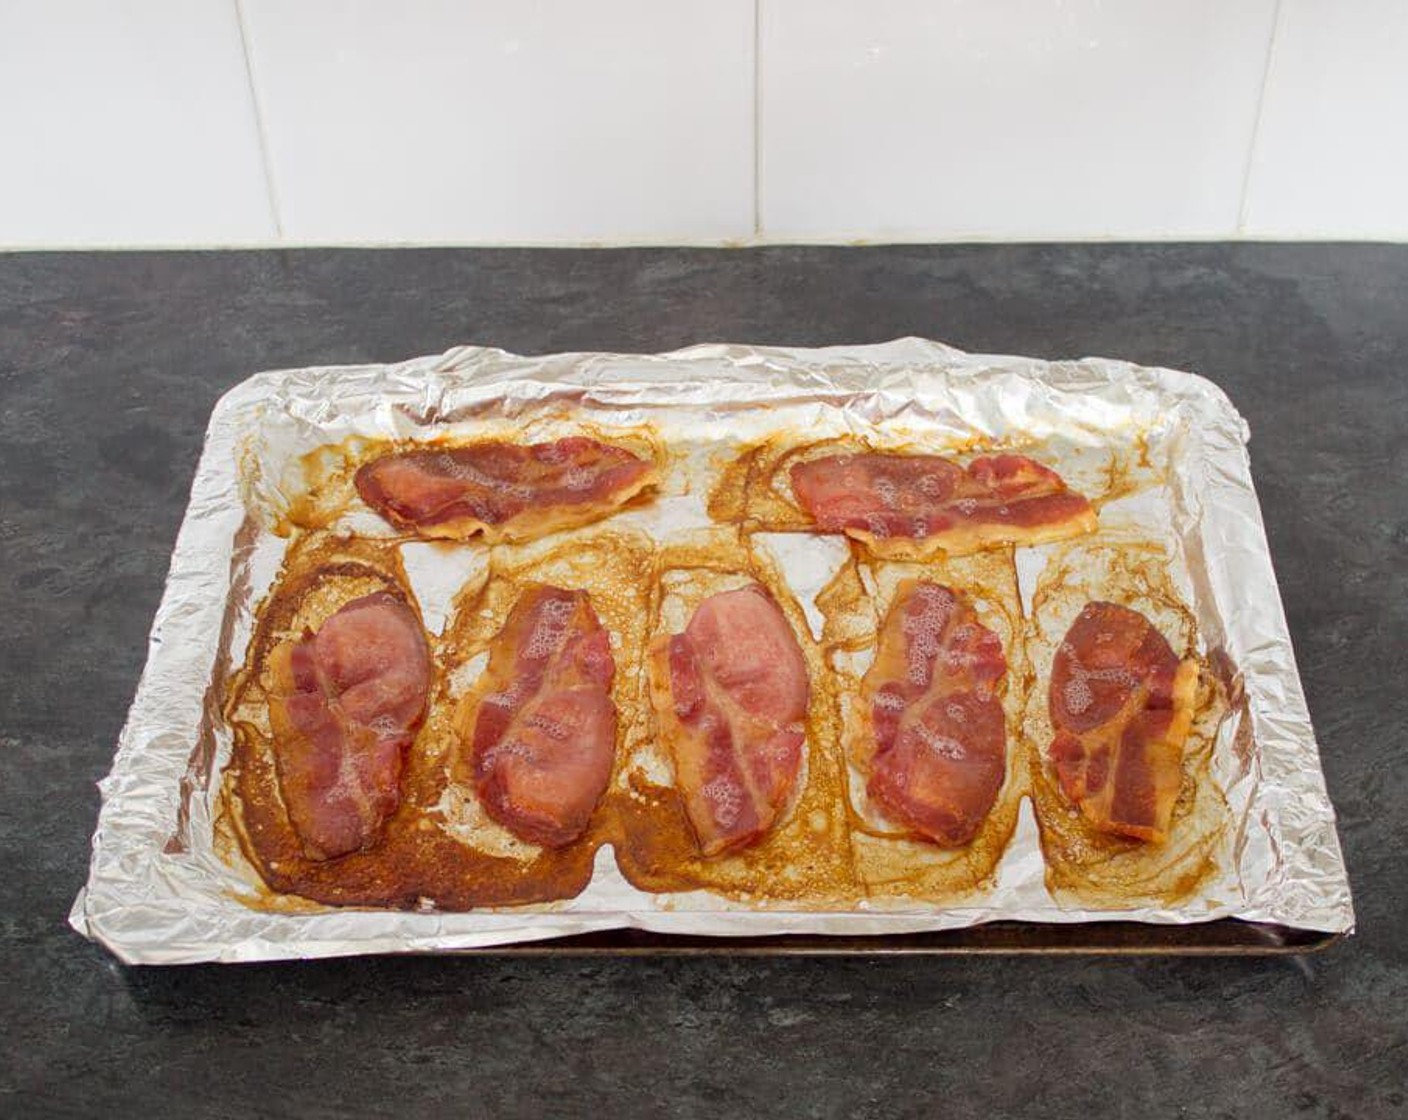 step 2 To cook the bacon, cover a baking tray in foil and evenly lay out the Smoked Bacon (8 slices). Place into the oven to cook until the fat is starting to become crisp, approximately 15-20 minutes. Turn them all over after about 10 minutes to ensure even cooking.